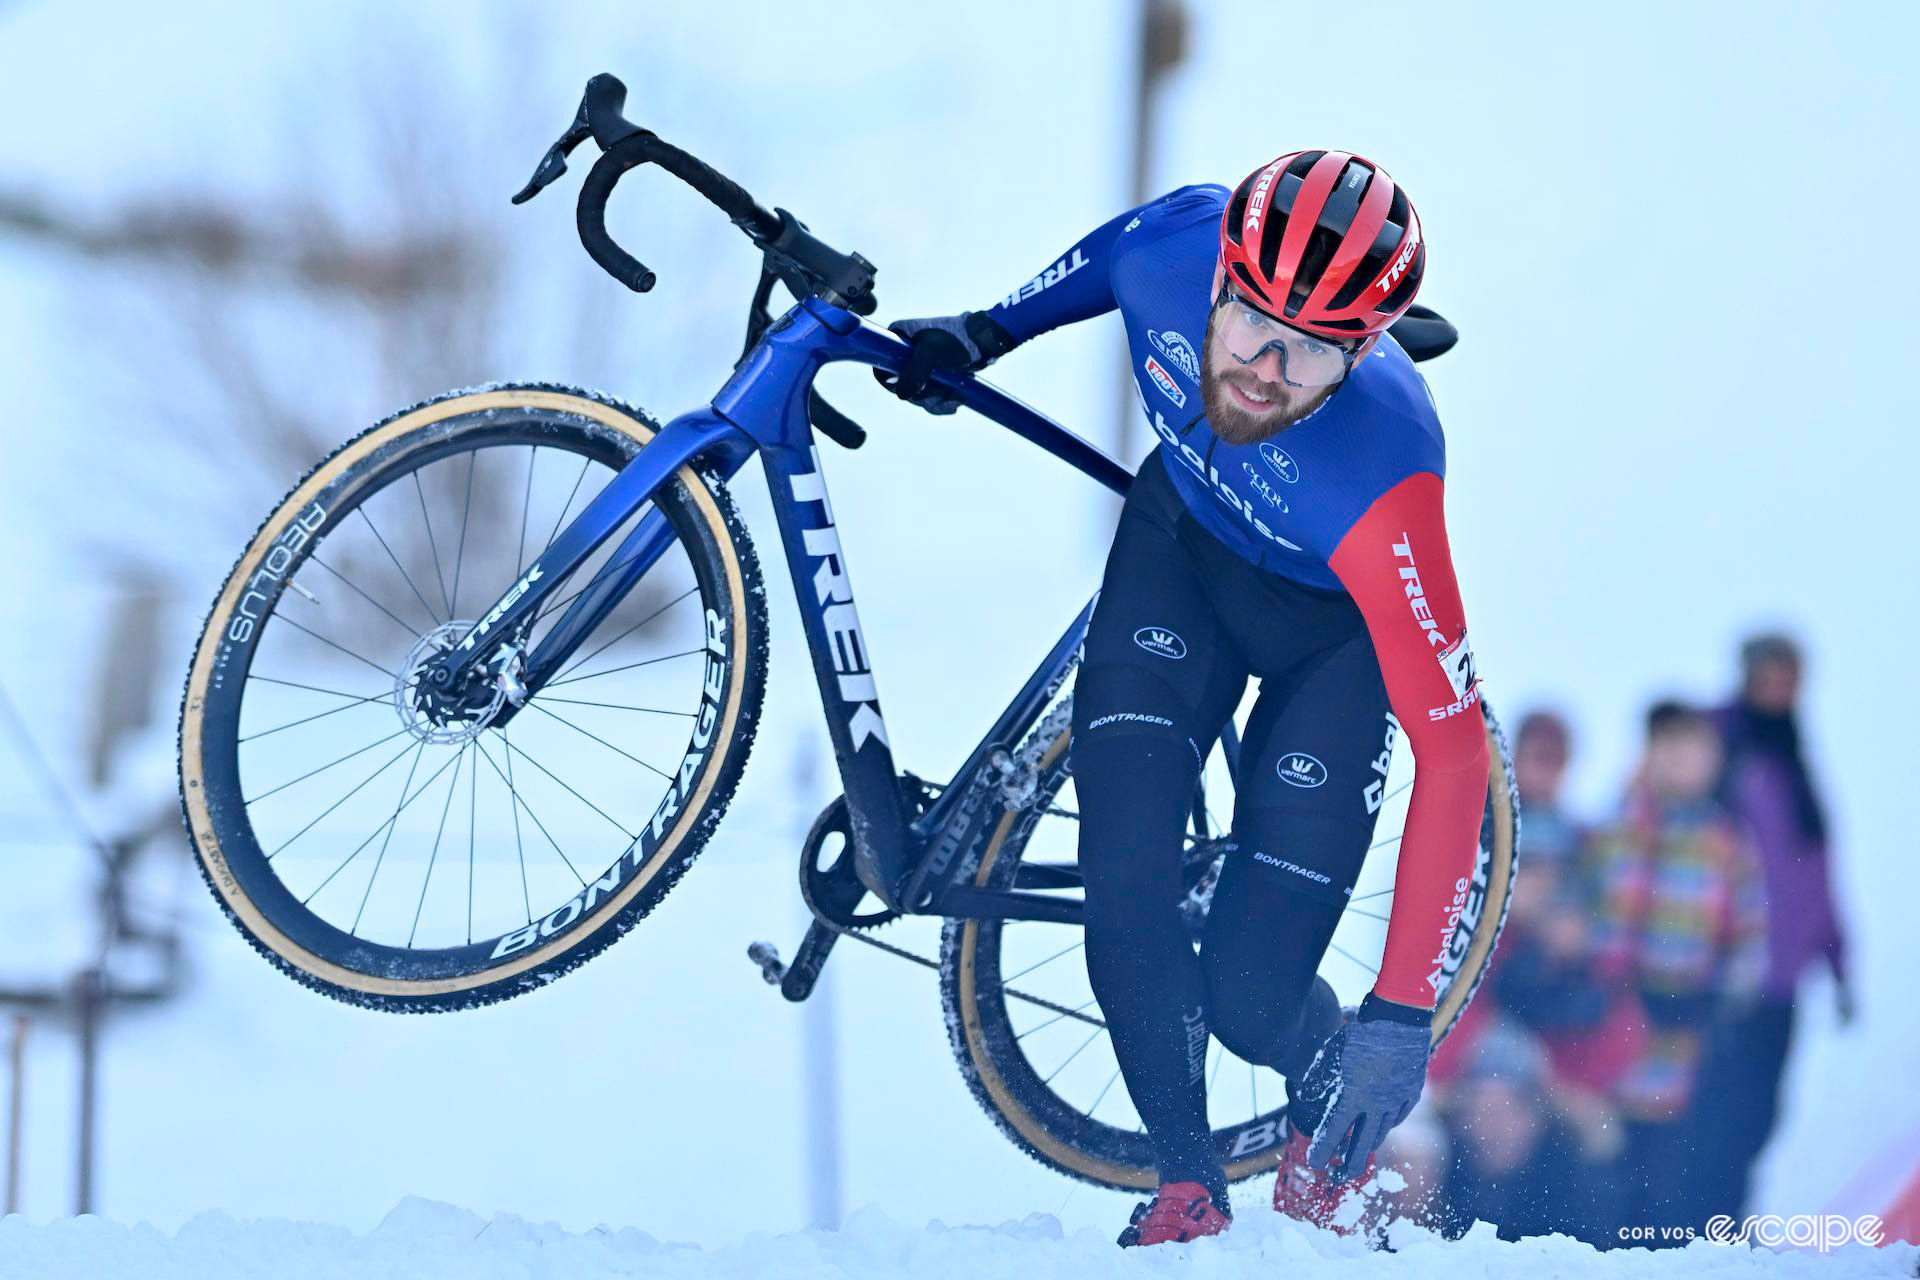 Joris Nieuwenhuis gets up off the snow, bike in hand, during UCI Cyclocross World Cup Val di Sole.